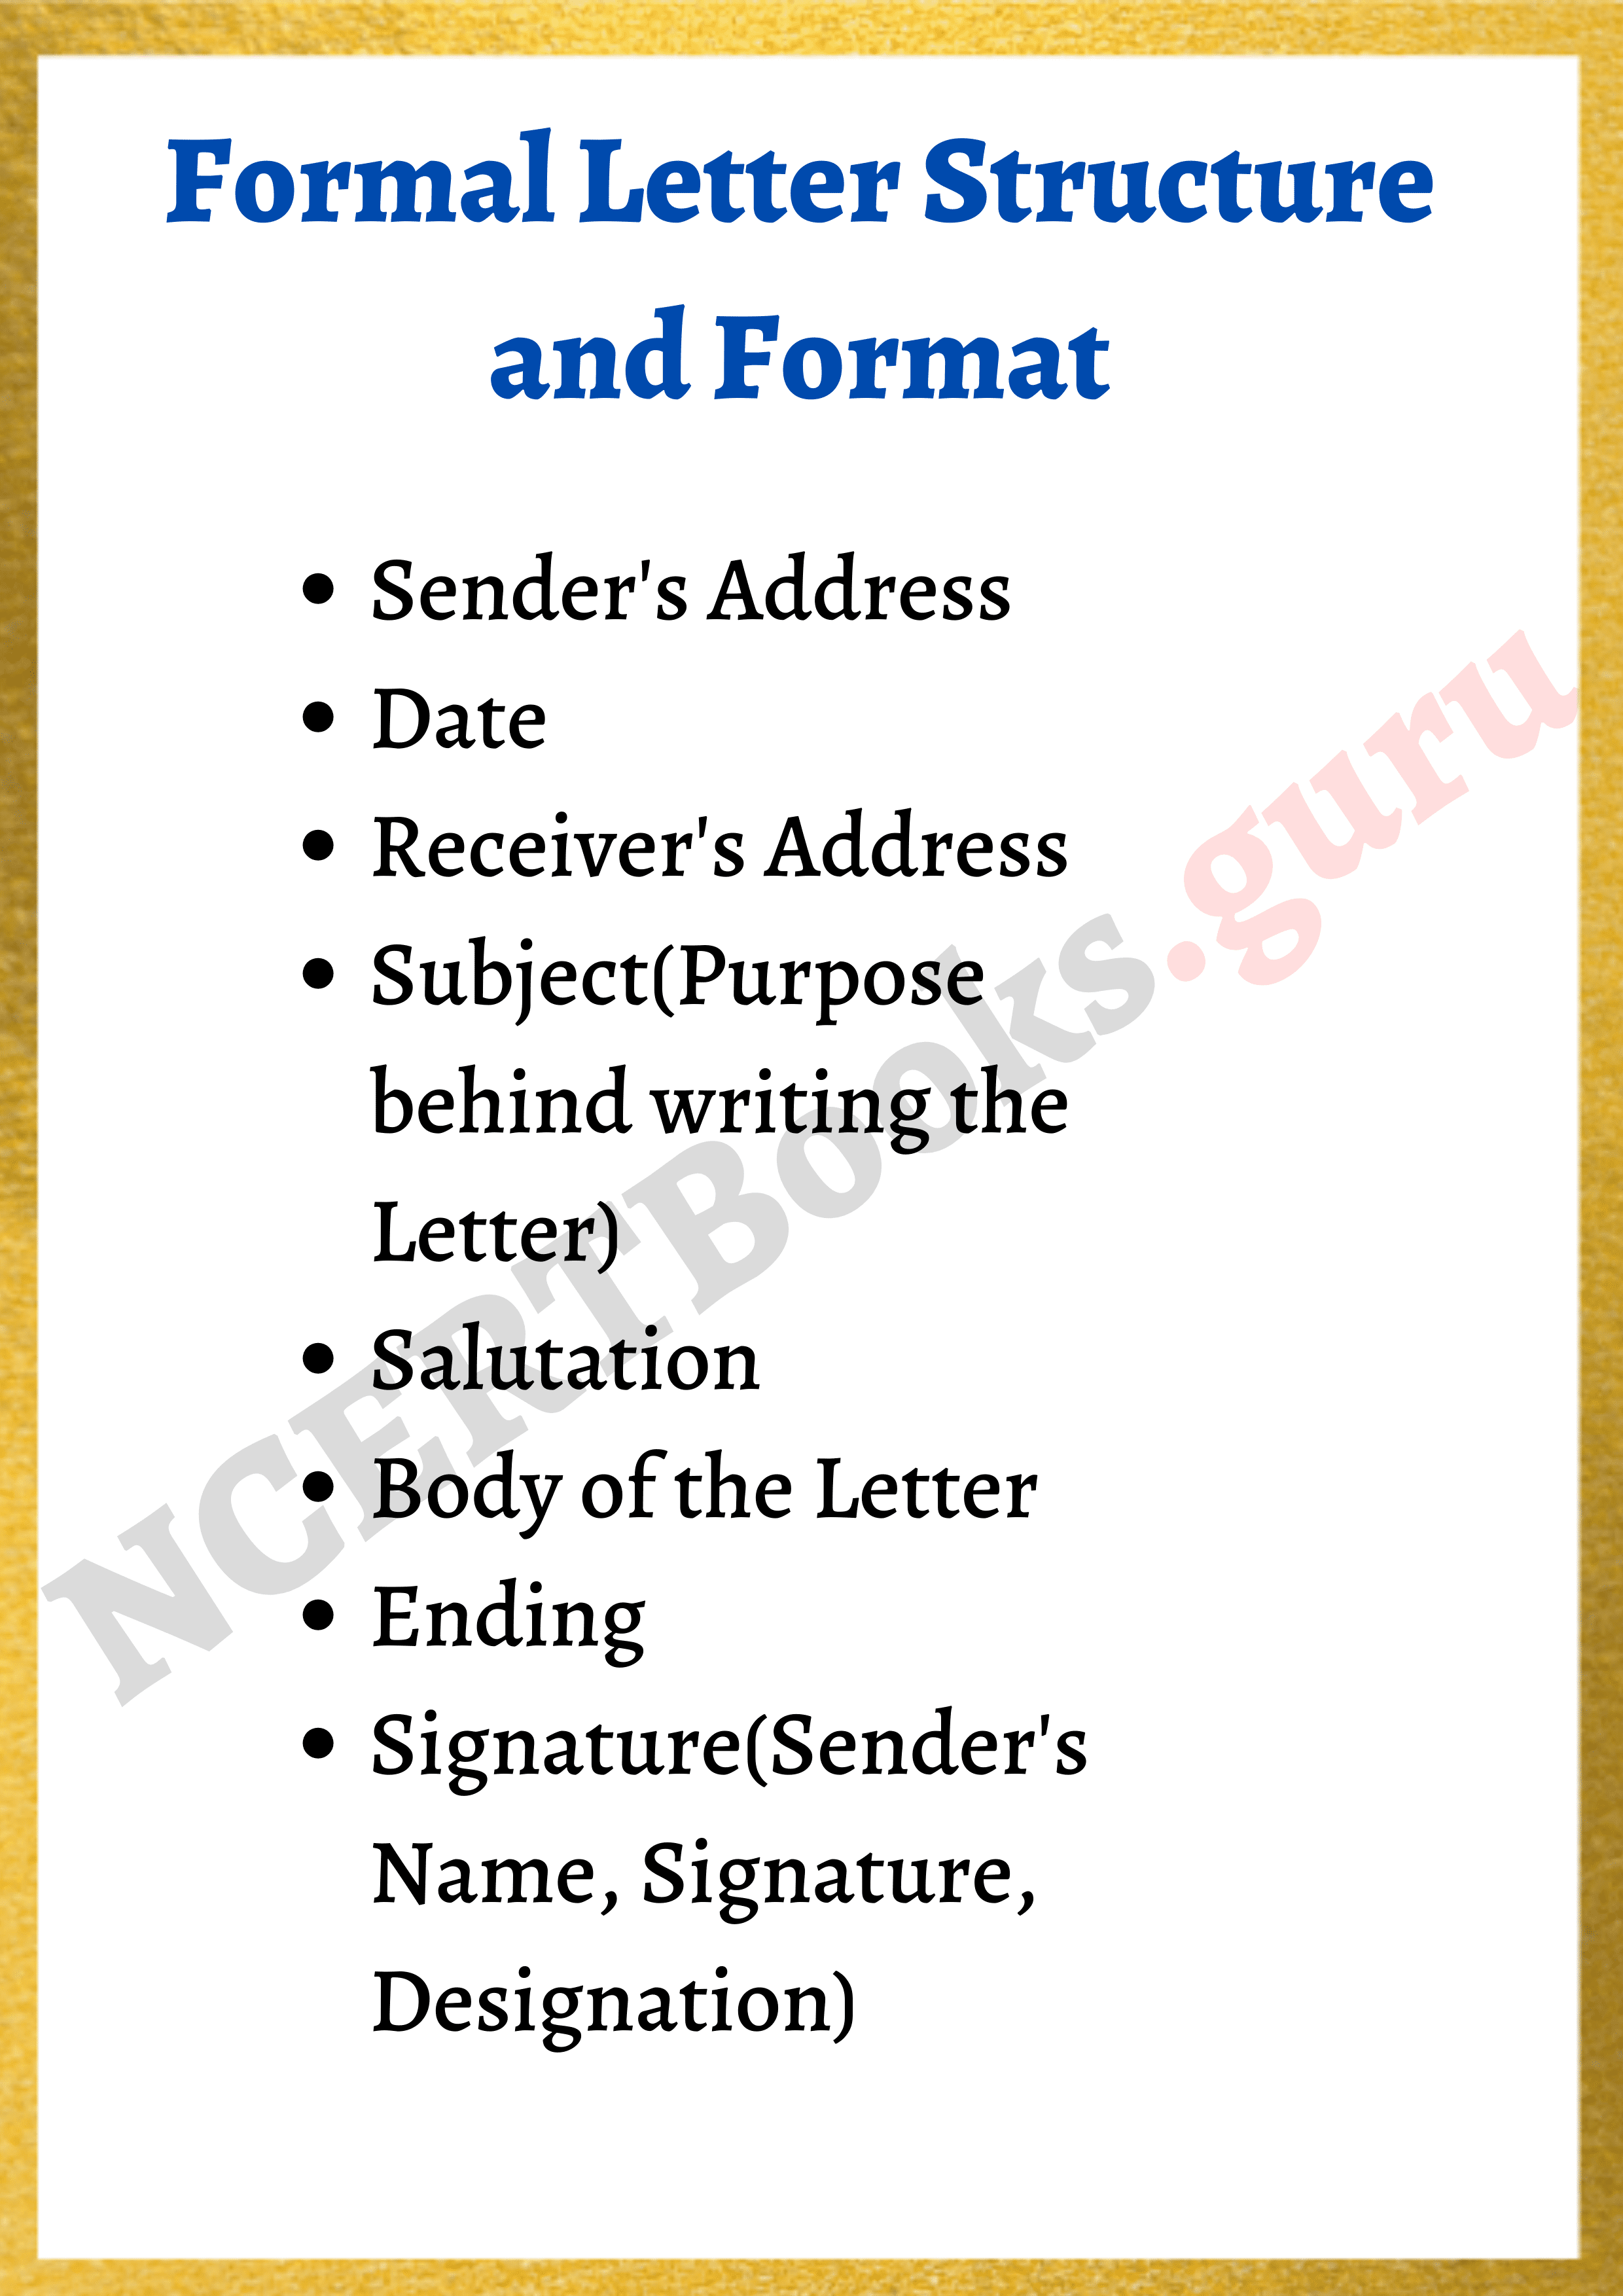 what-are-the-different-types-of-formal-letters-login-pages-info